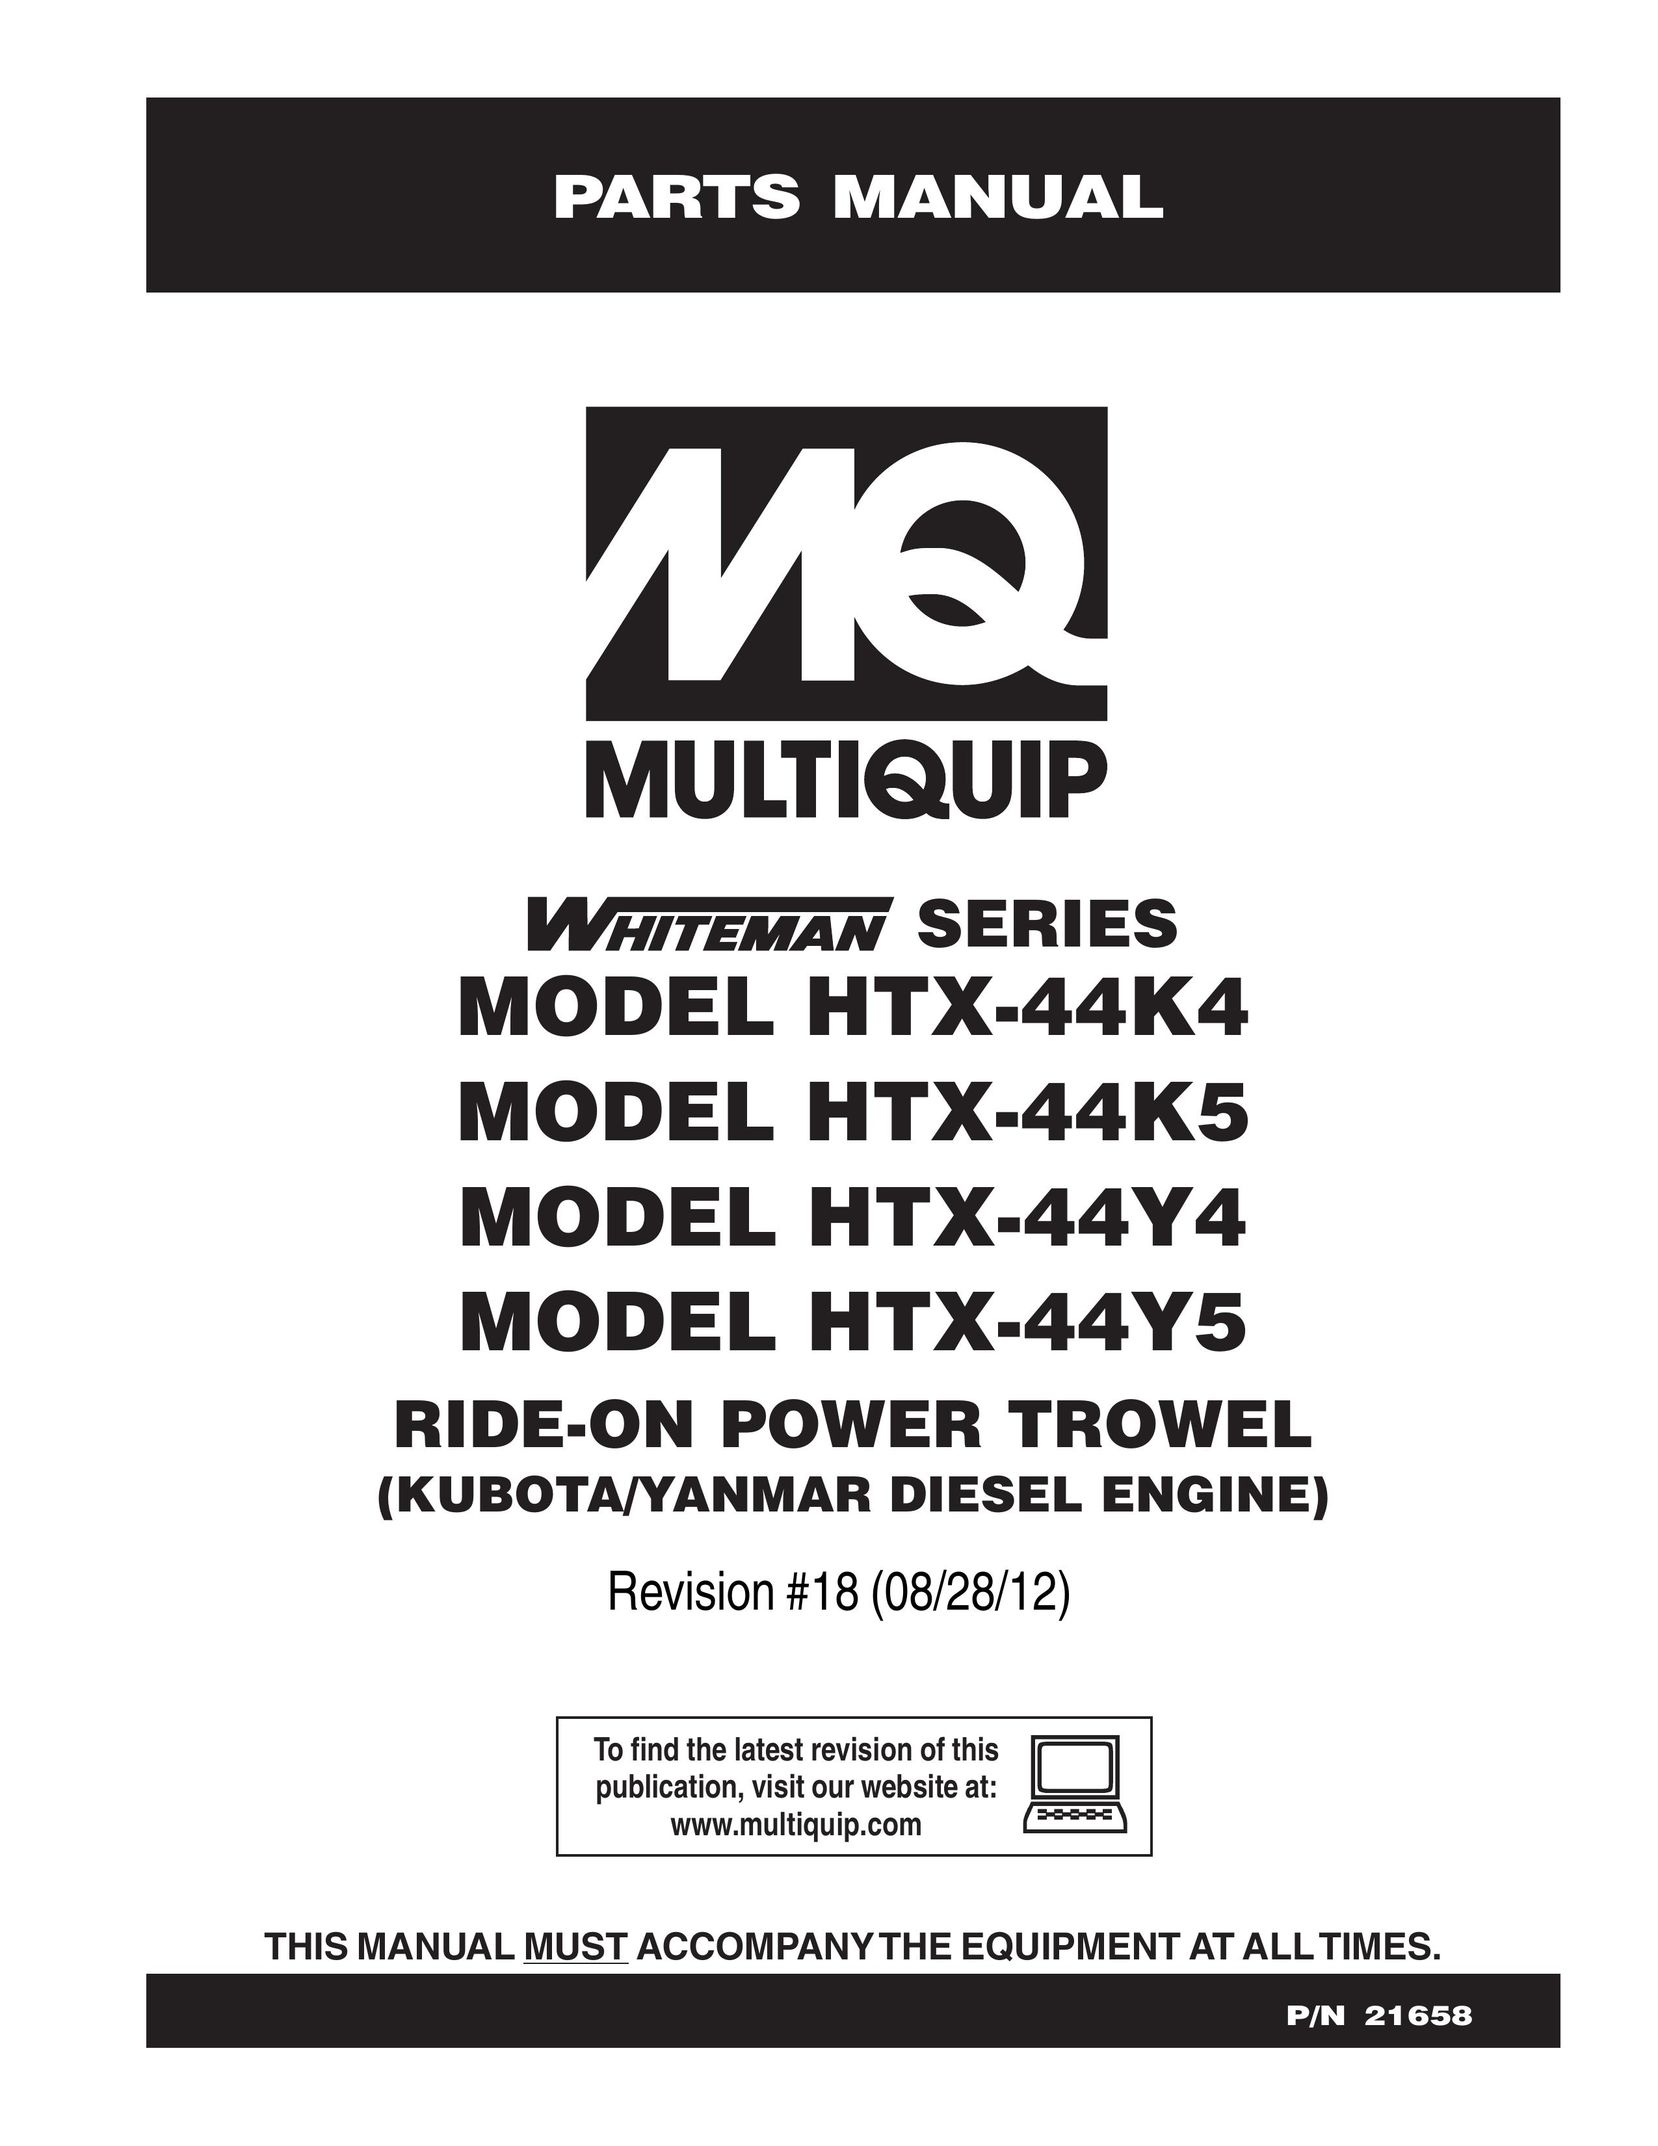 Multiquip HTX-44Y5 Riding Toy User Manual